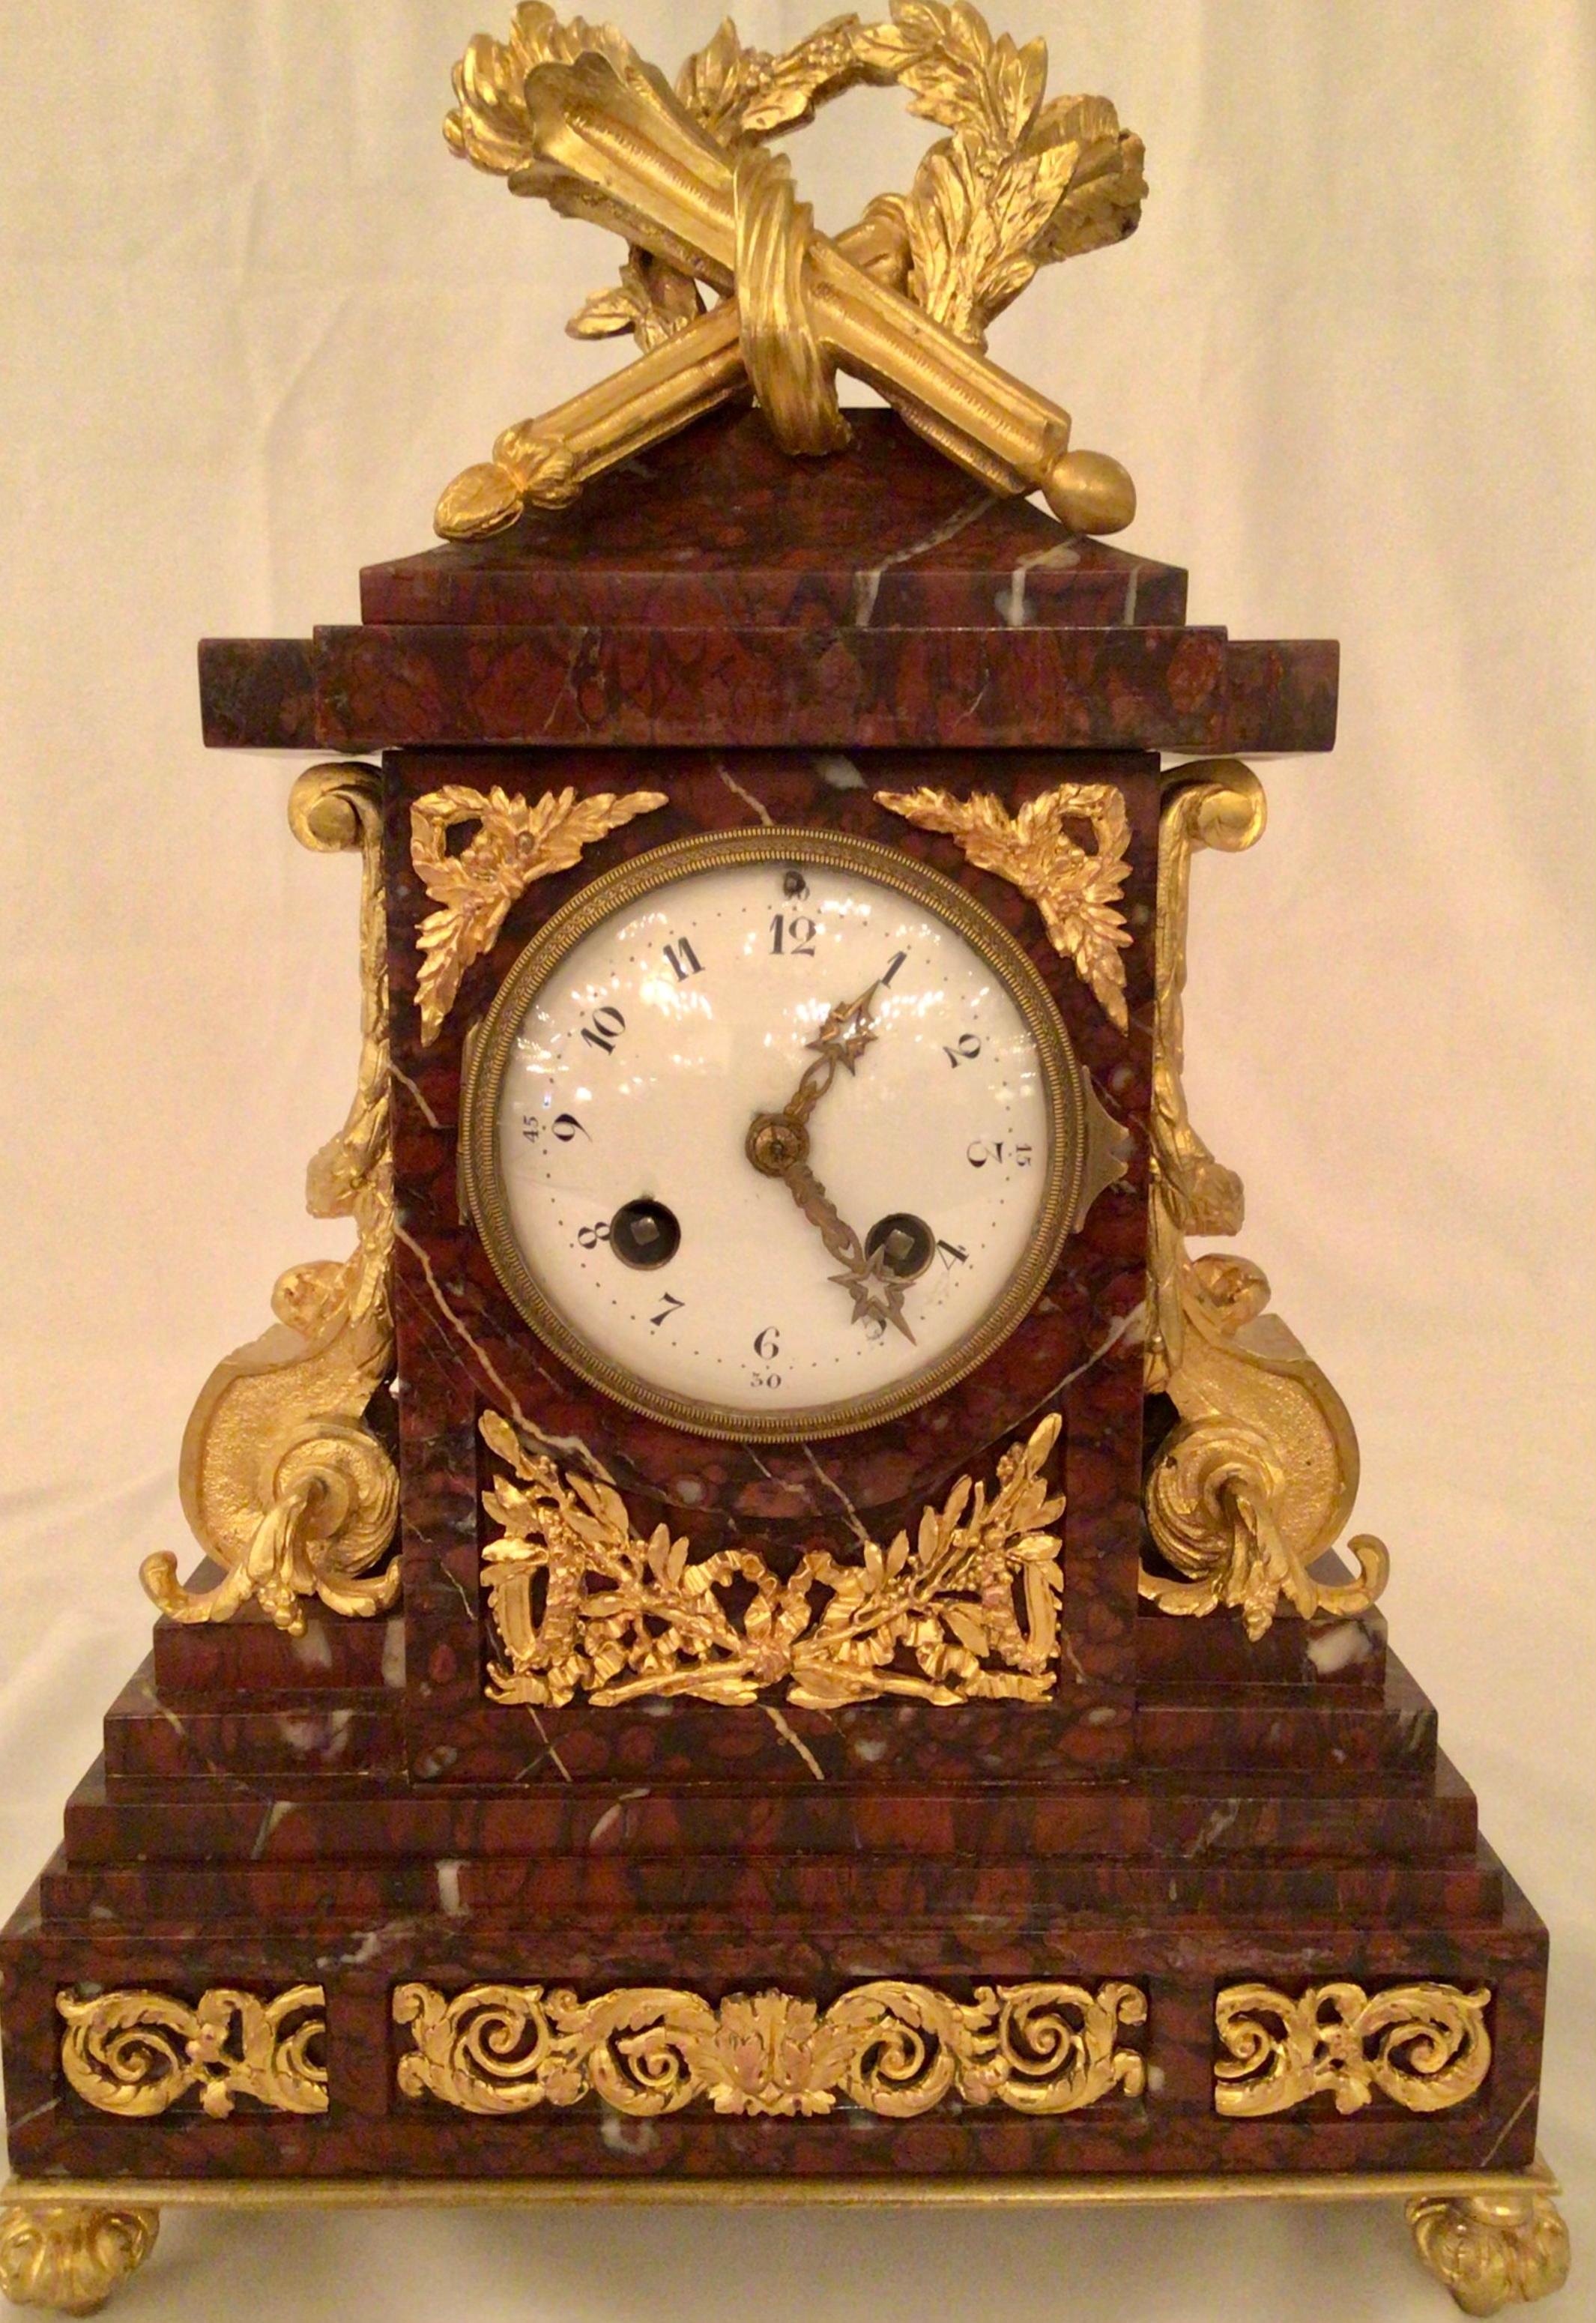 Antique French exquisite quality Ormolu clock and candlesticks of Vatican rouge marble, circa 1875-1885

Clock measures 15” H x 10” W x 4 1/2” D
Candlestick measures 13” H x 7” W x 5” D

CLF084.